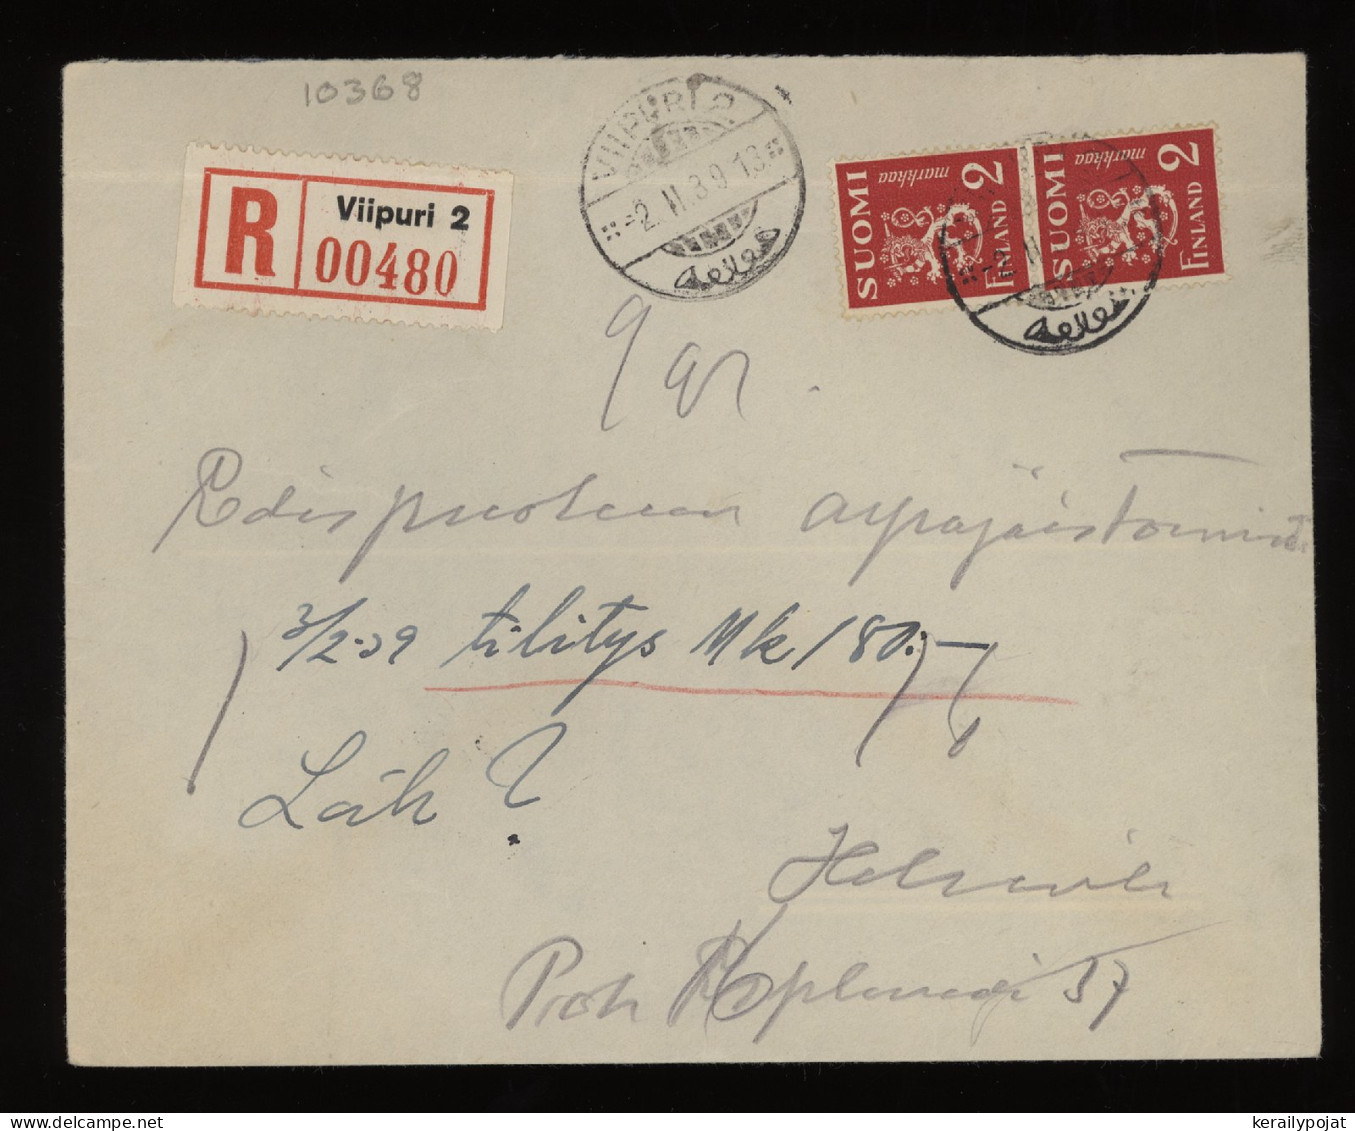 Finland 1939 Viipuri 2 Registered Cover__(10368) - Lettres & Documents